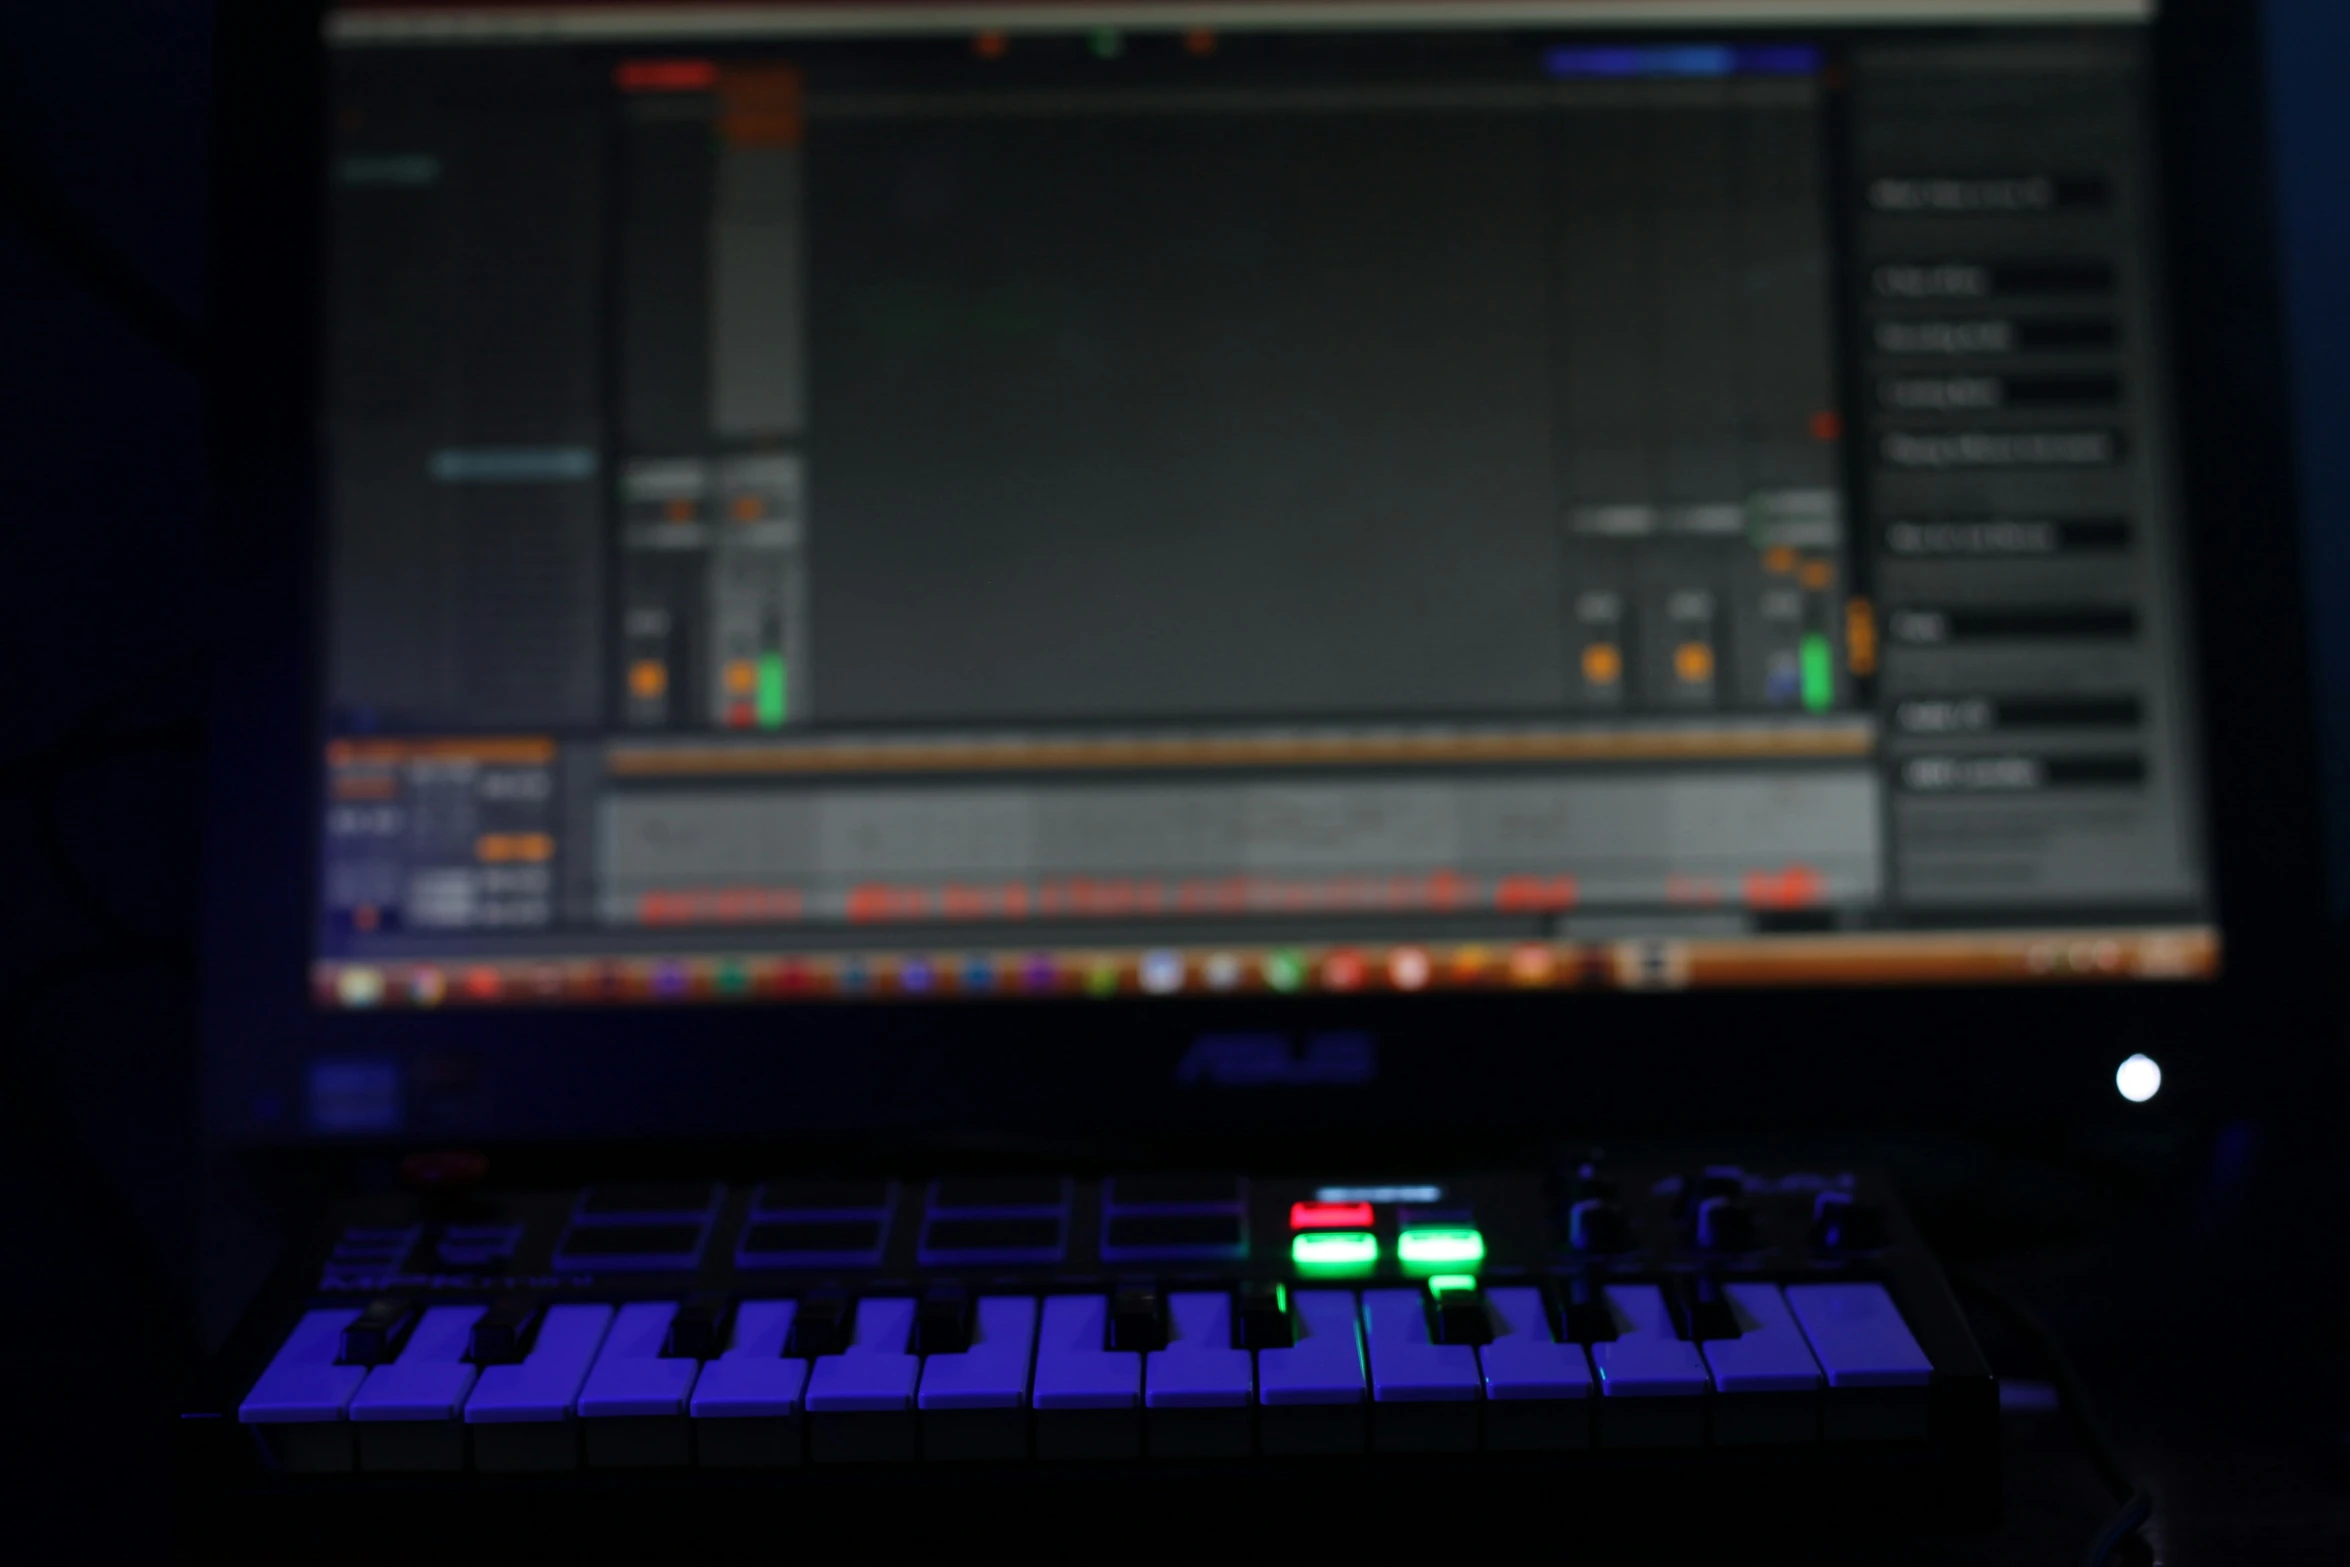 the keyboard is illuminated by a glowing screen